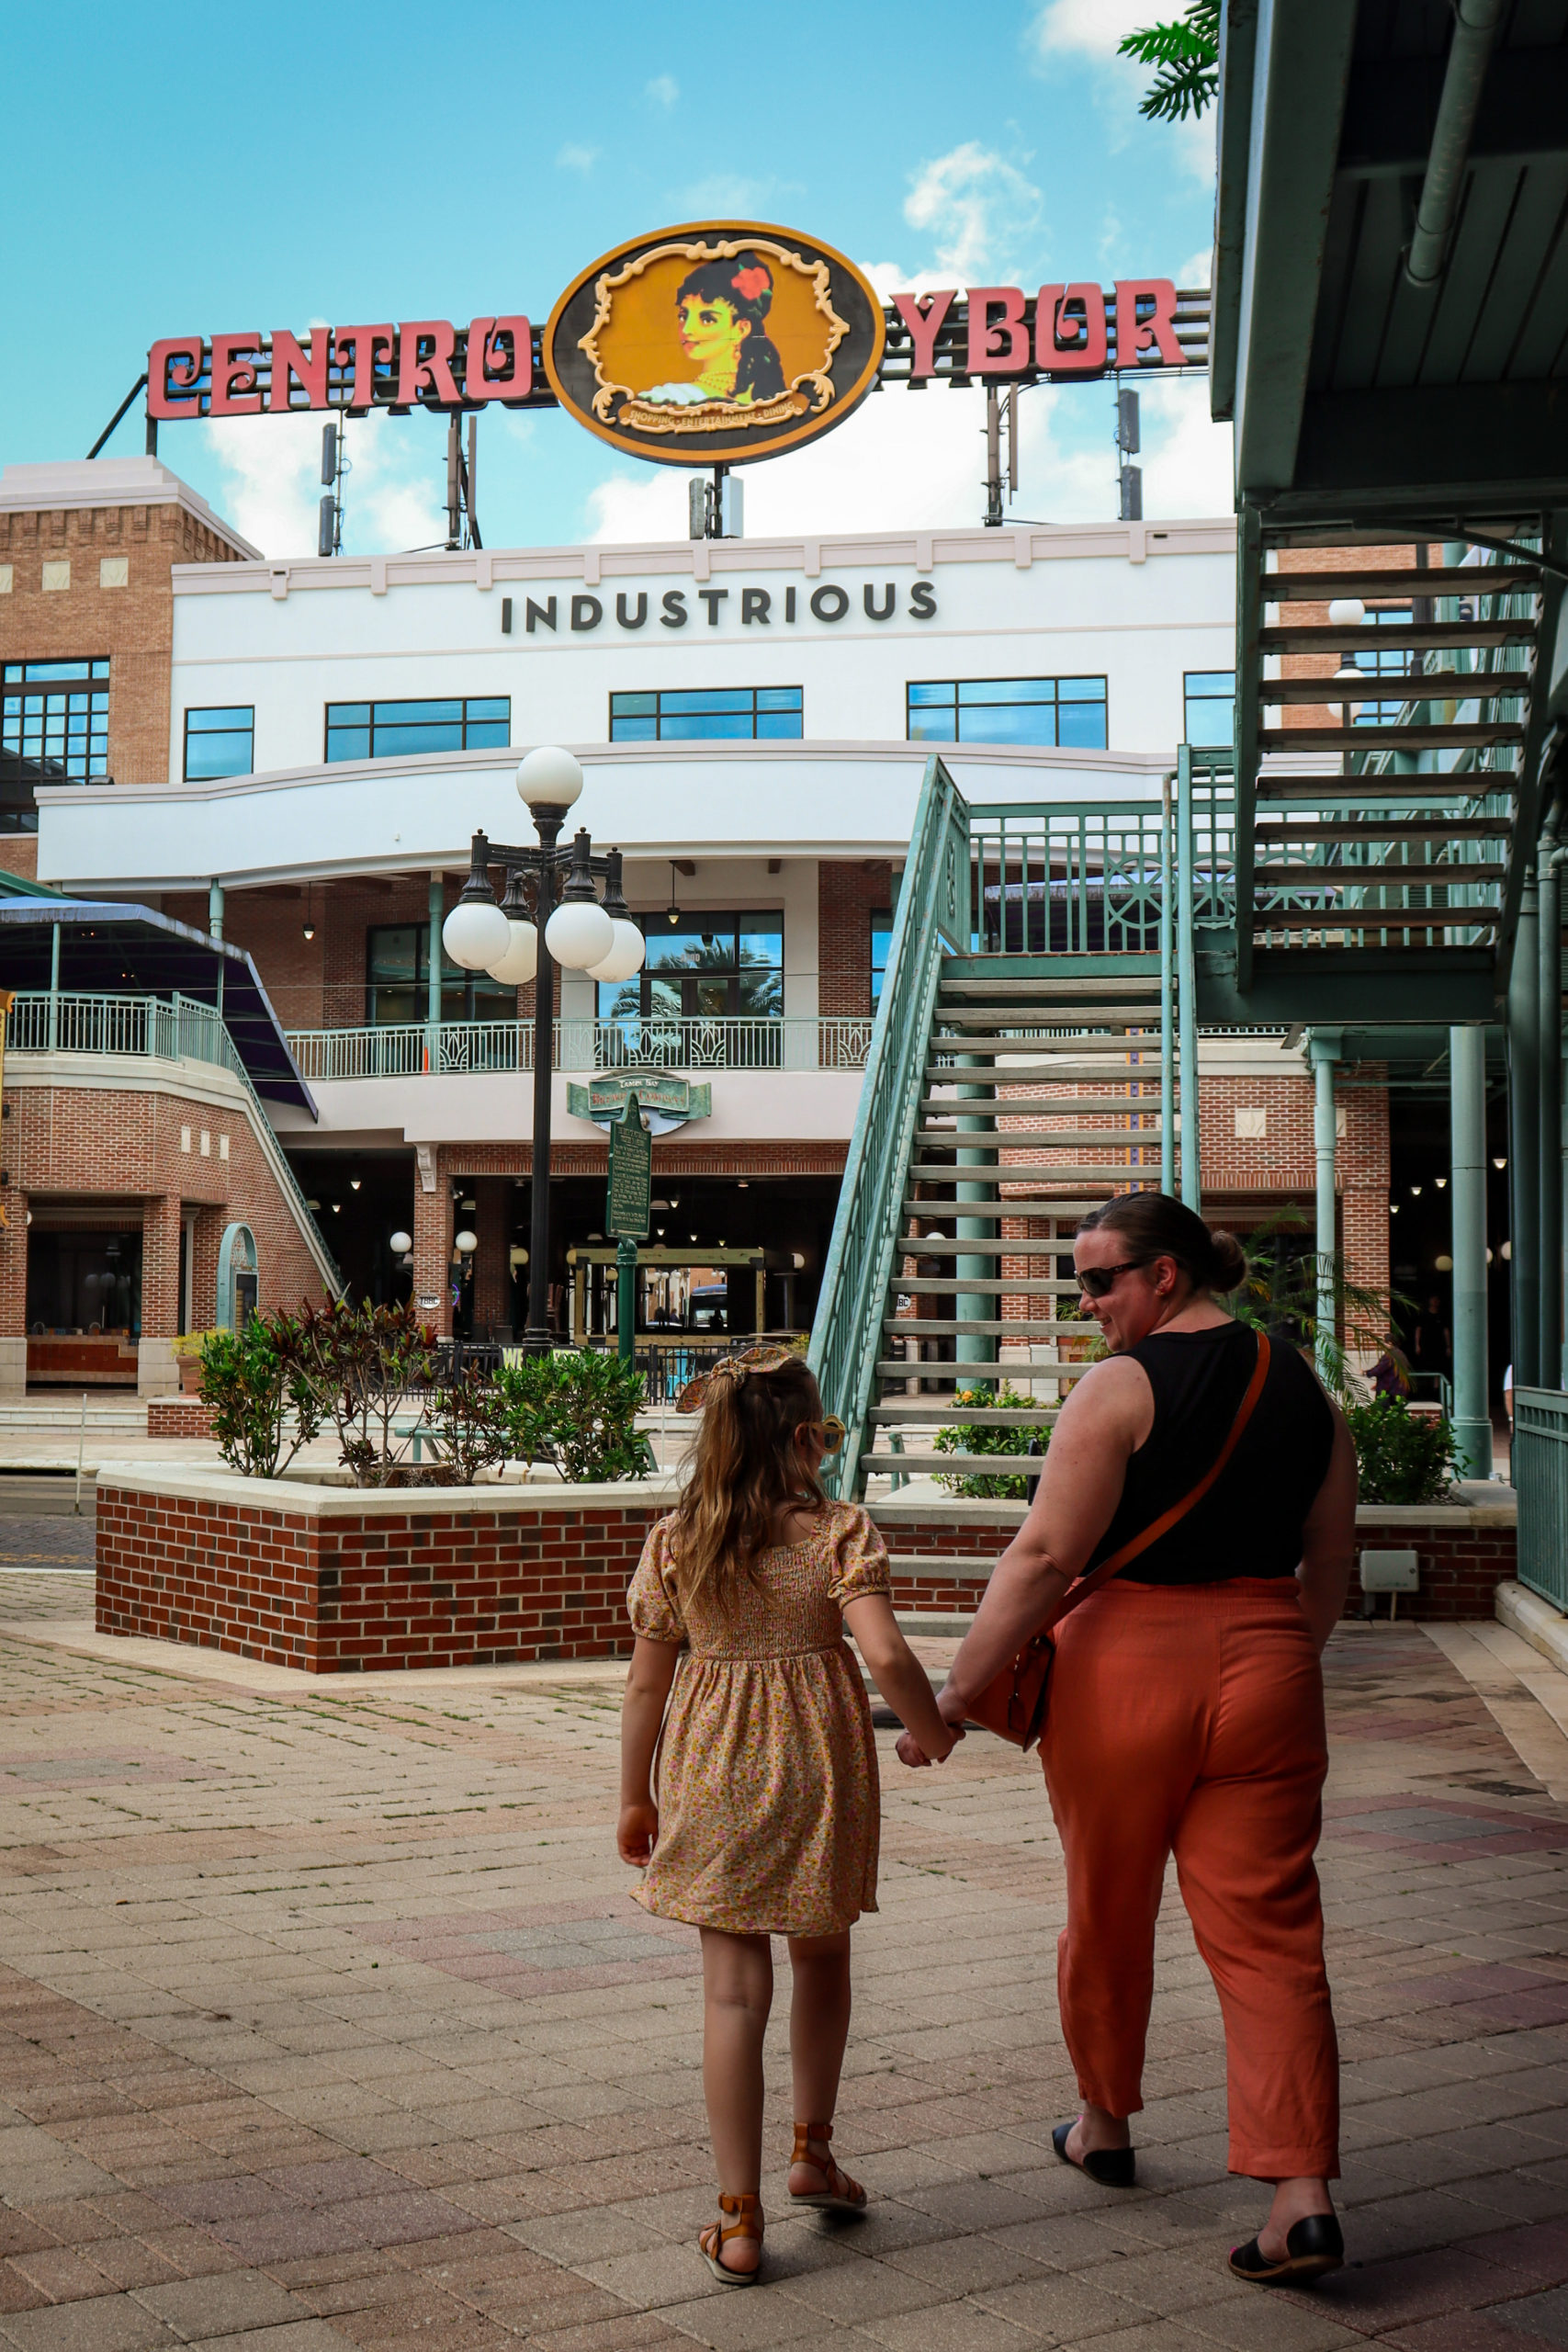 A mom and her young daughter walk around Ybor City, a must-see neighborhood when you visit Tampa Bay with Kids.